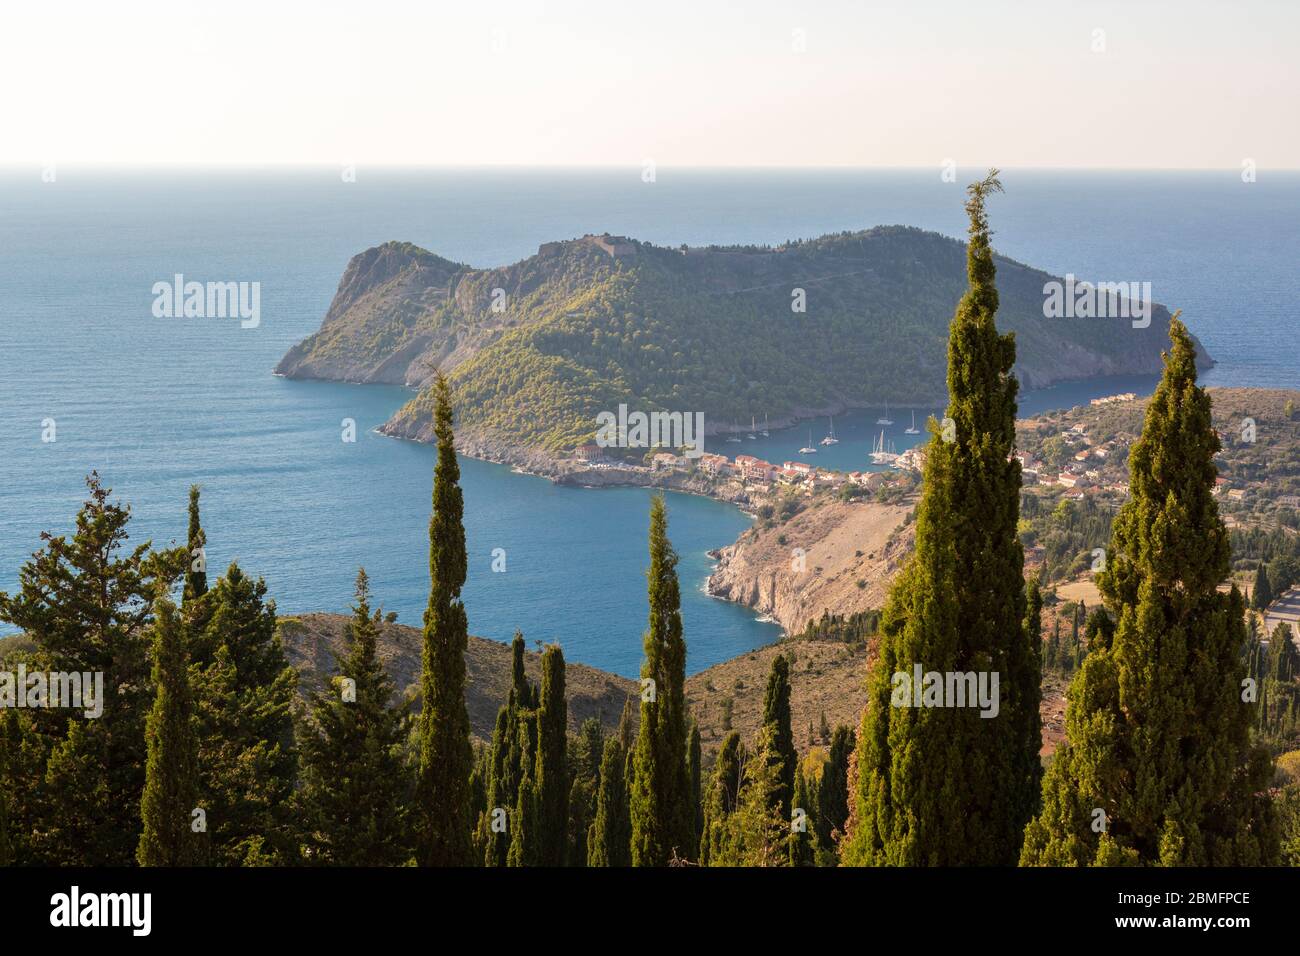 Long-range view through trees towards the traditional village of Assos, Kefalonia, Ionian Islands, Greece Stock Photo